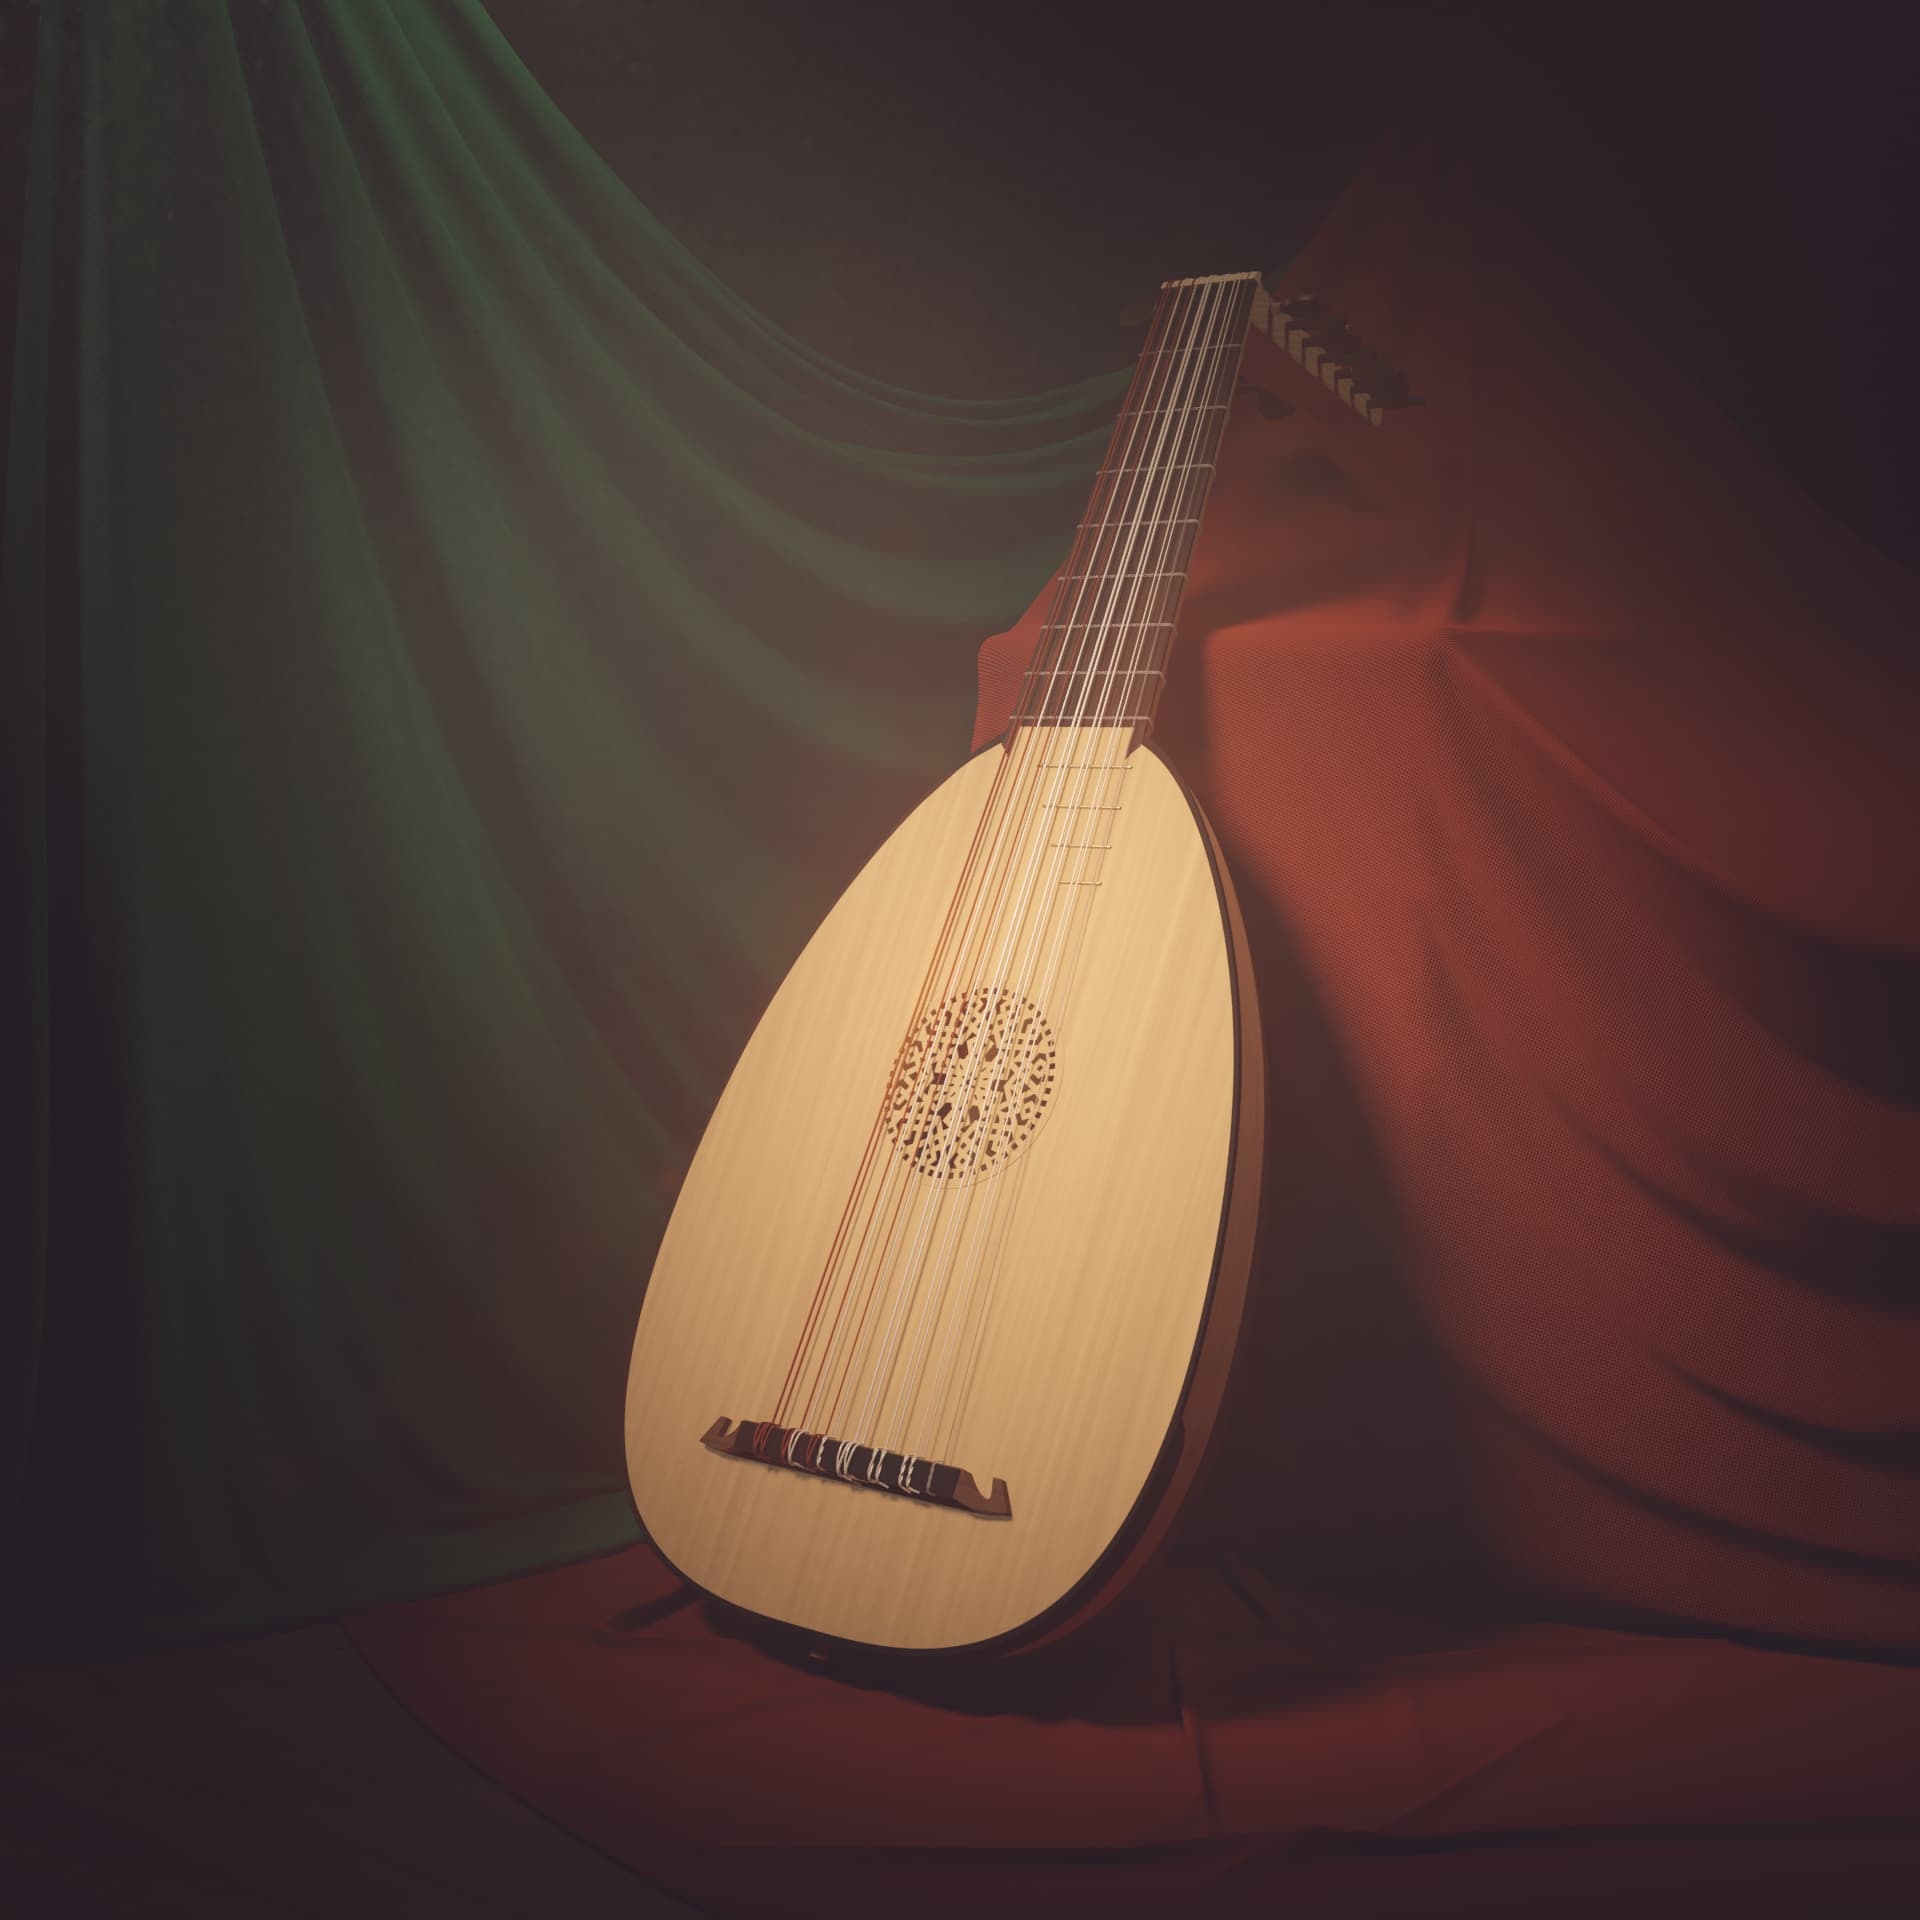 Lute: Artistic Impression On The Painting, One Of The Symbols Of Renaissance And Baroque Periods. 1920x1920 HD Background.